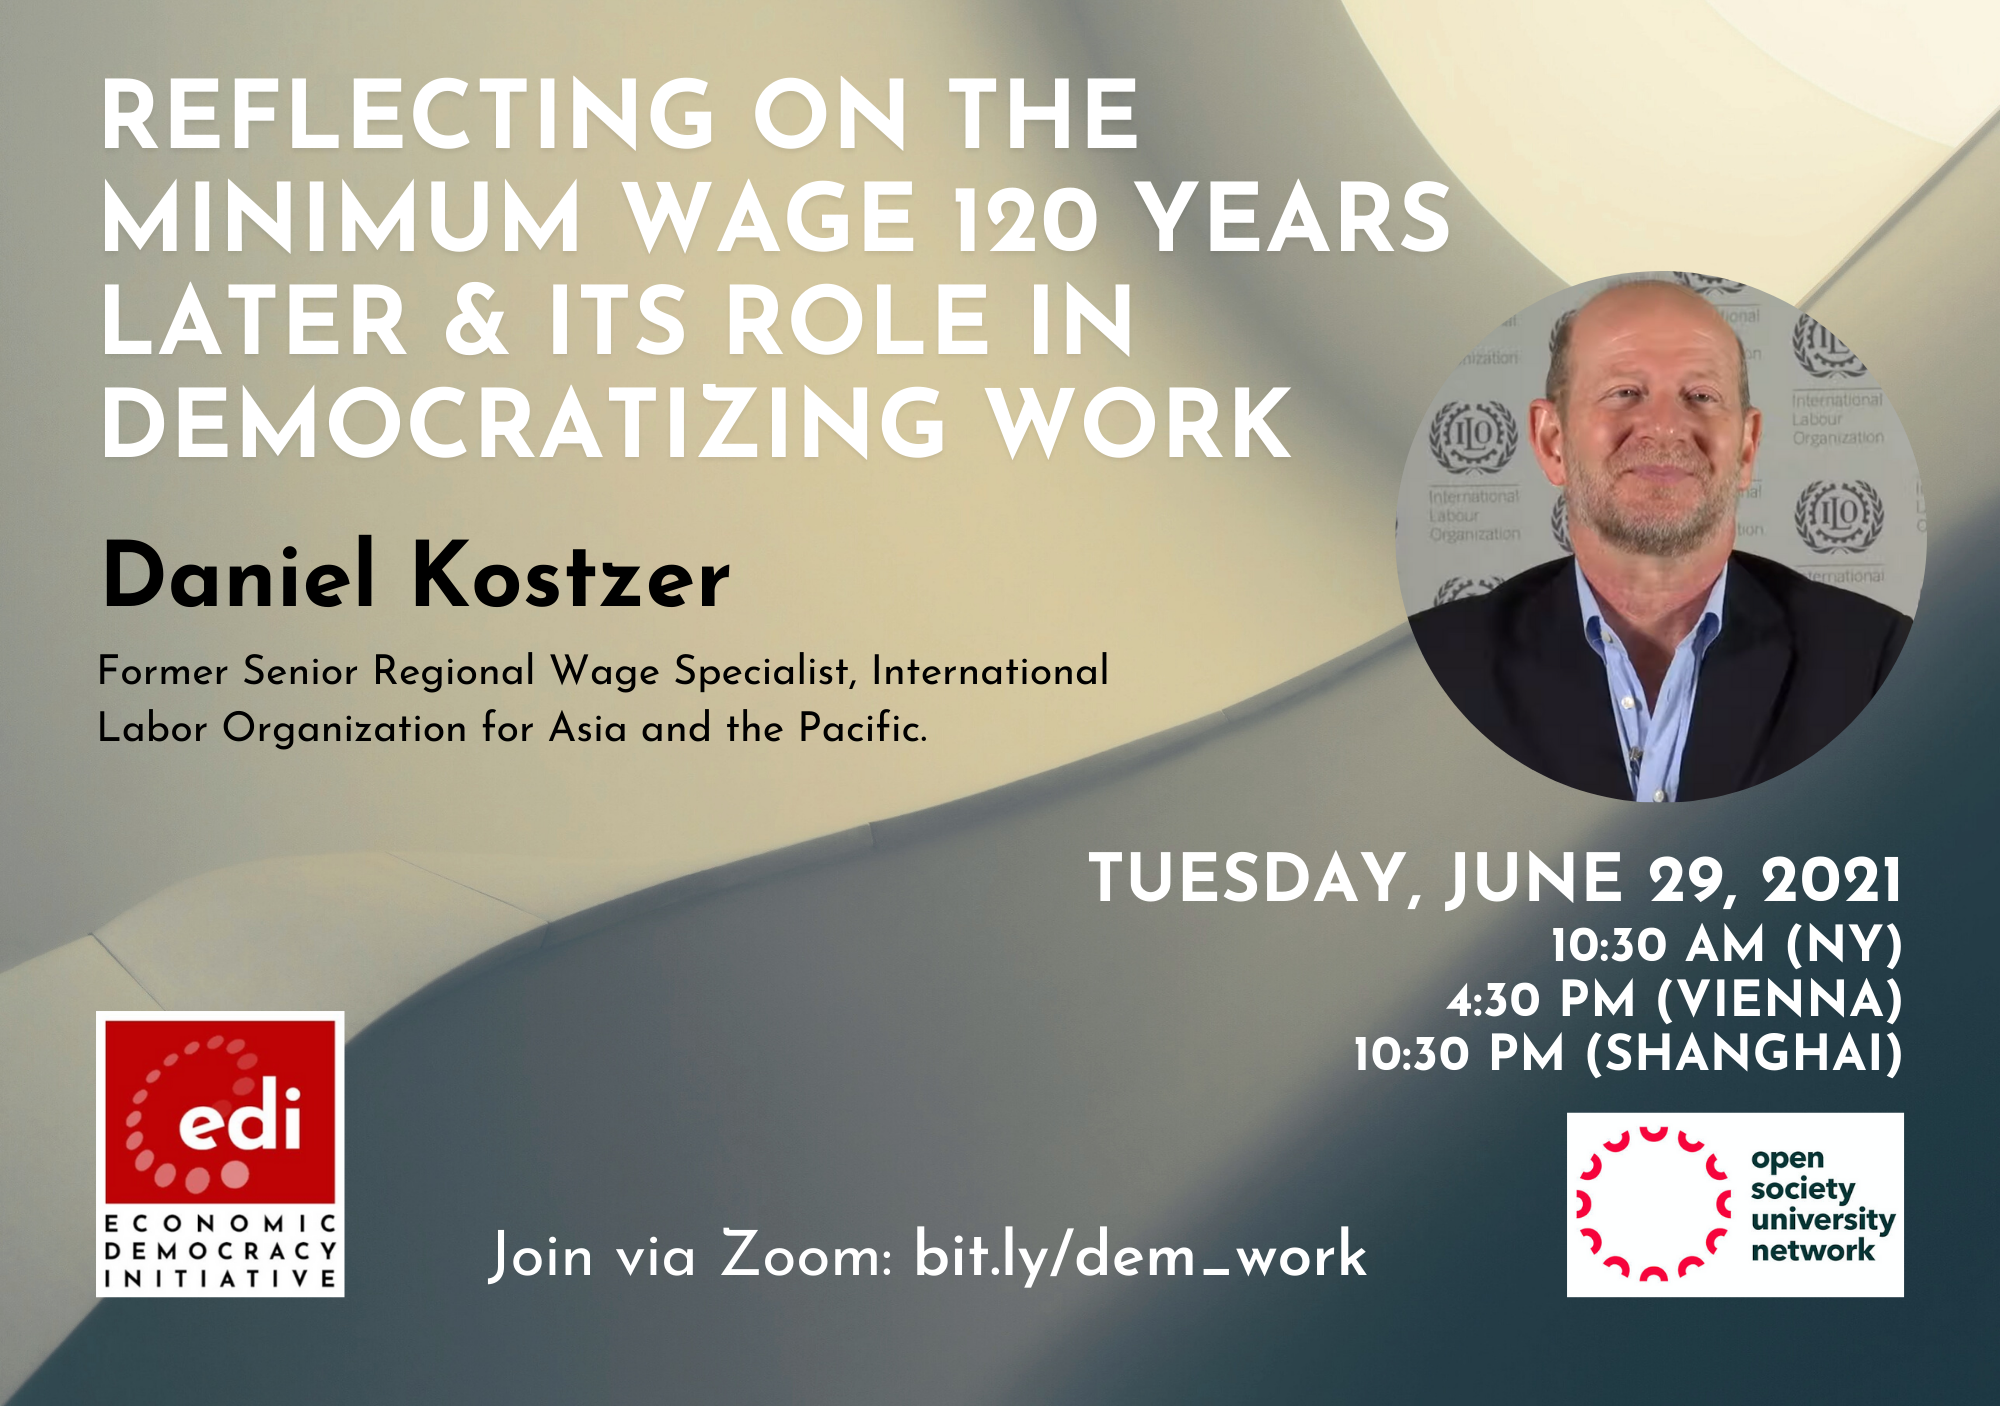 Daniel Kostzer: Reflecting on the Minimum Wage 120 Years Later and its Role in Democratizing Work